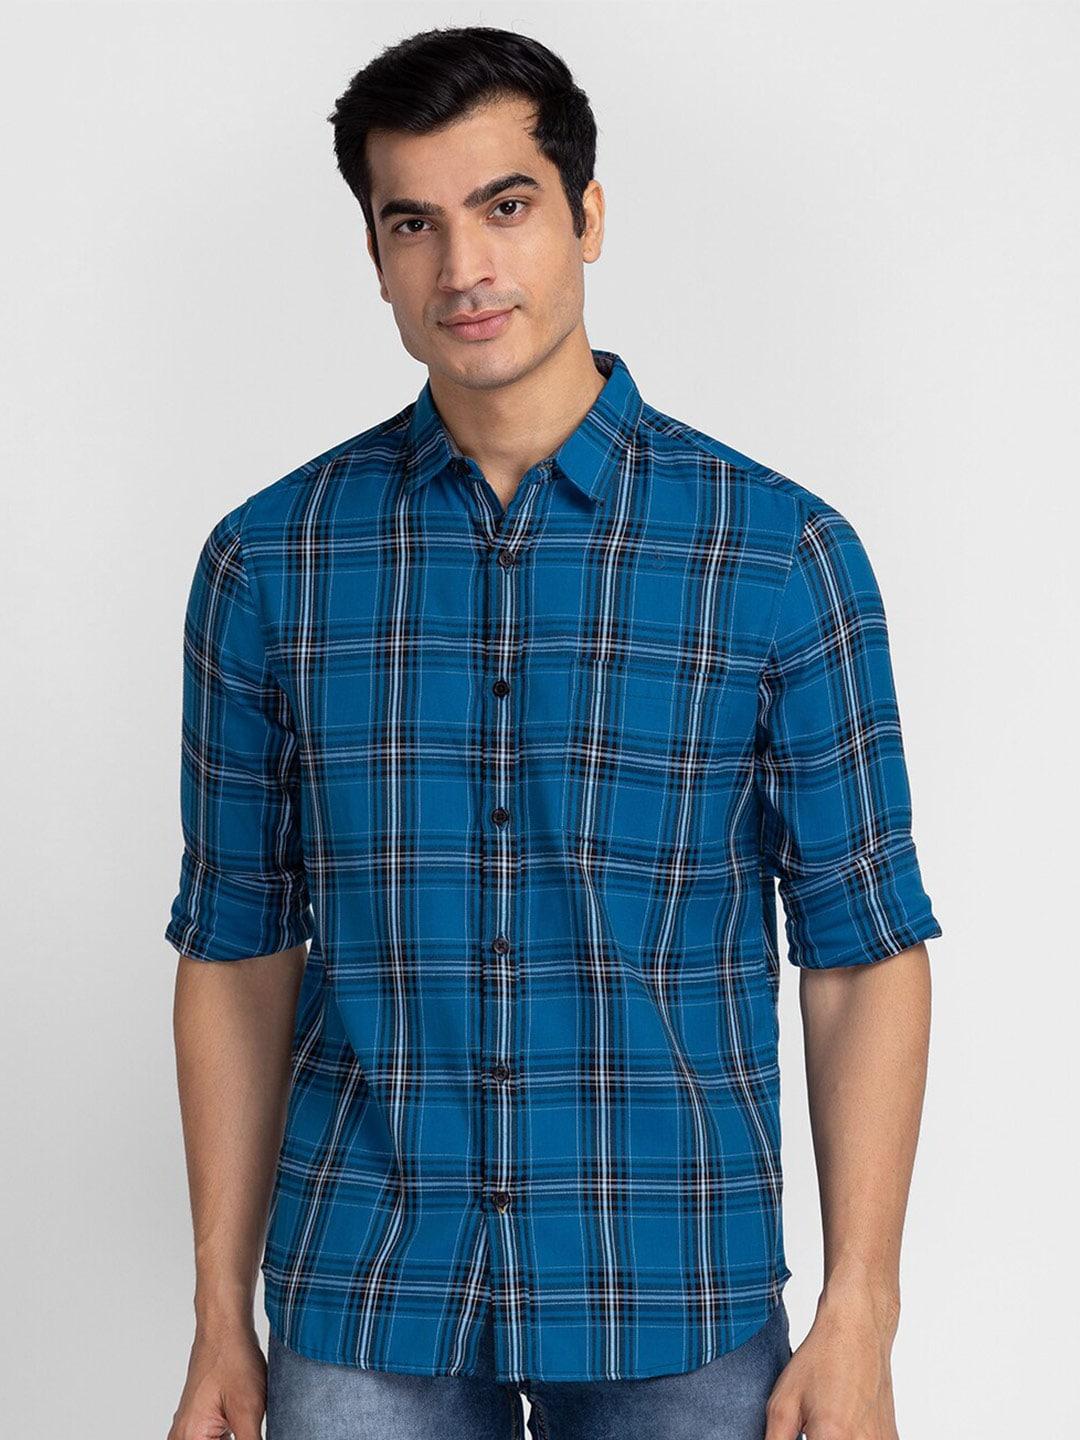 globus men teal blue checked pure cotton casual shirt